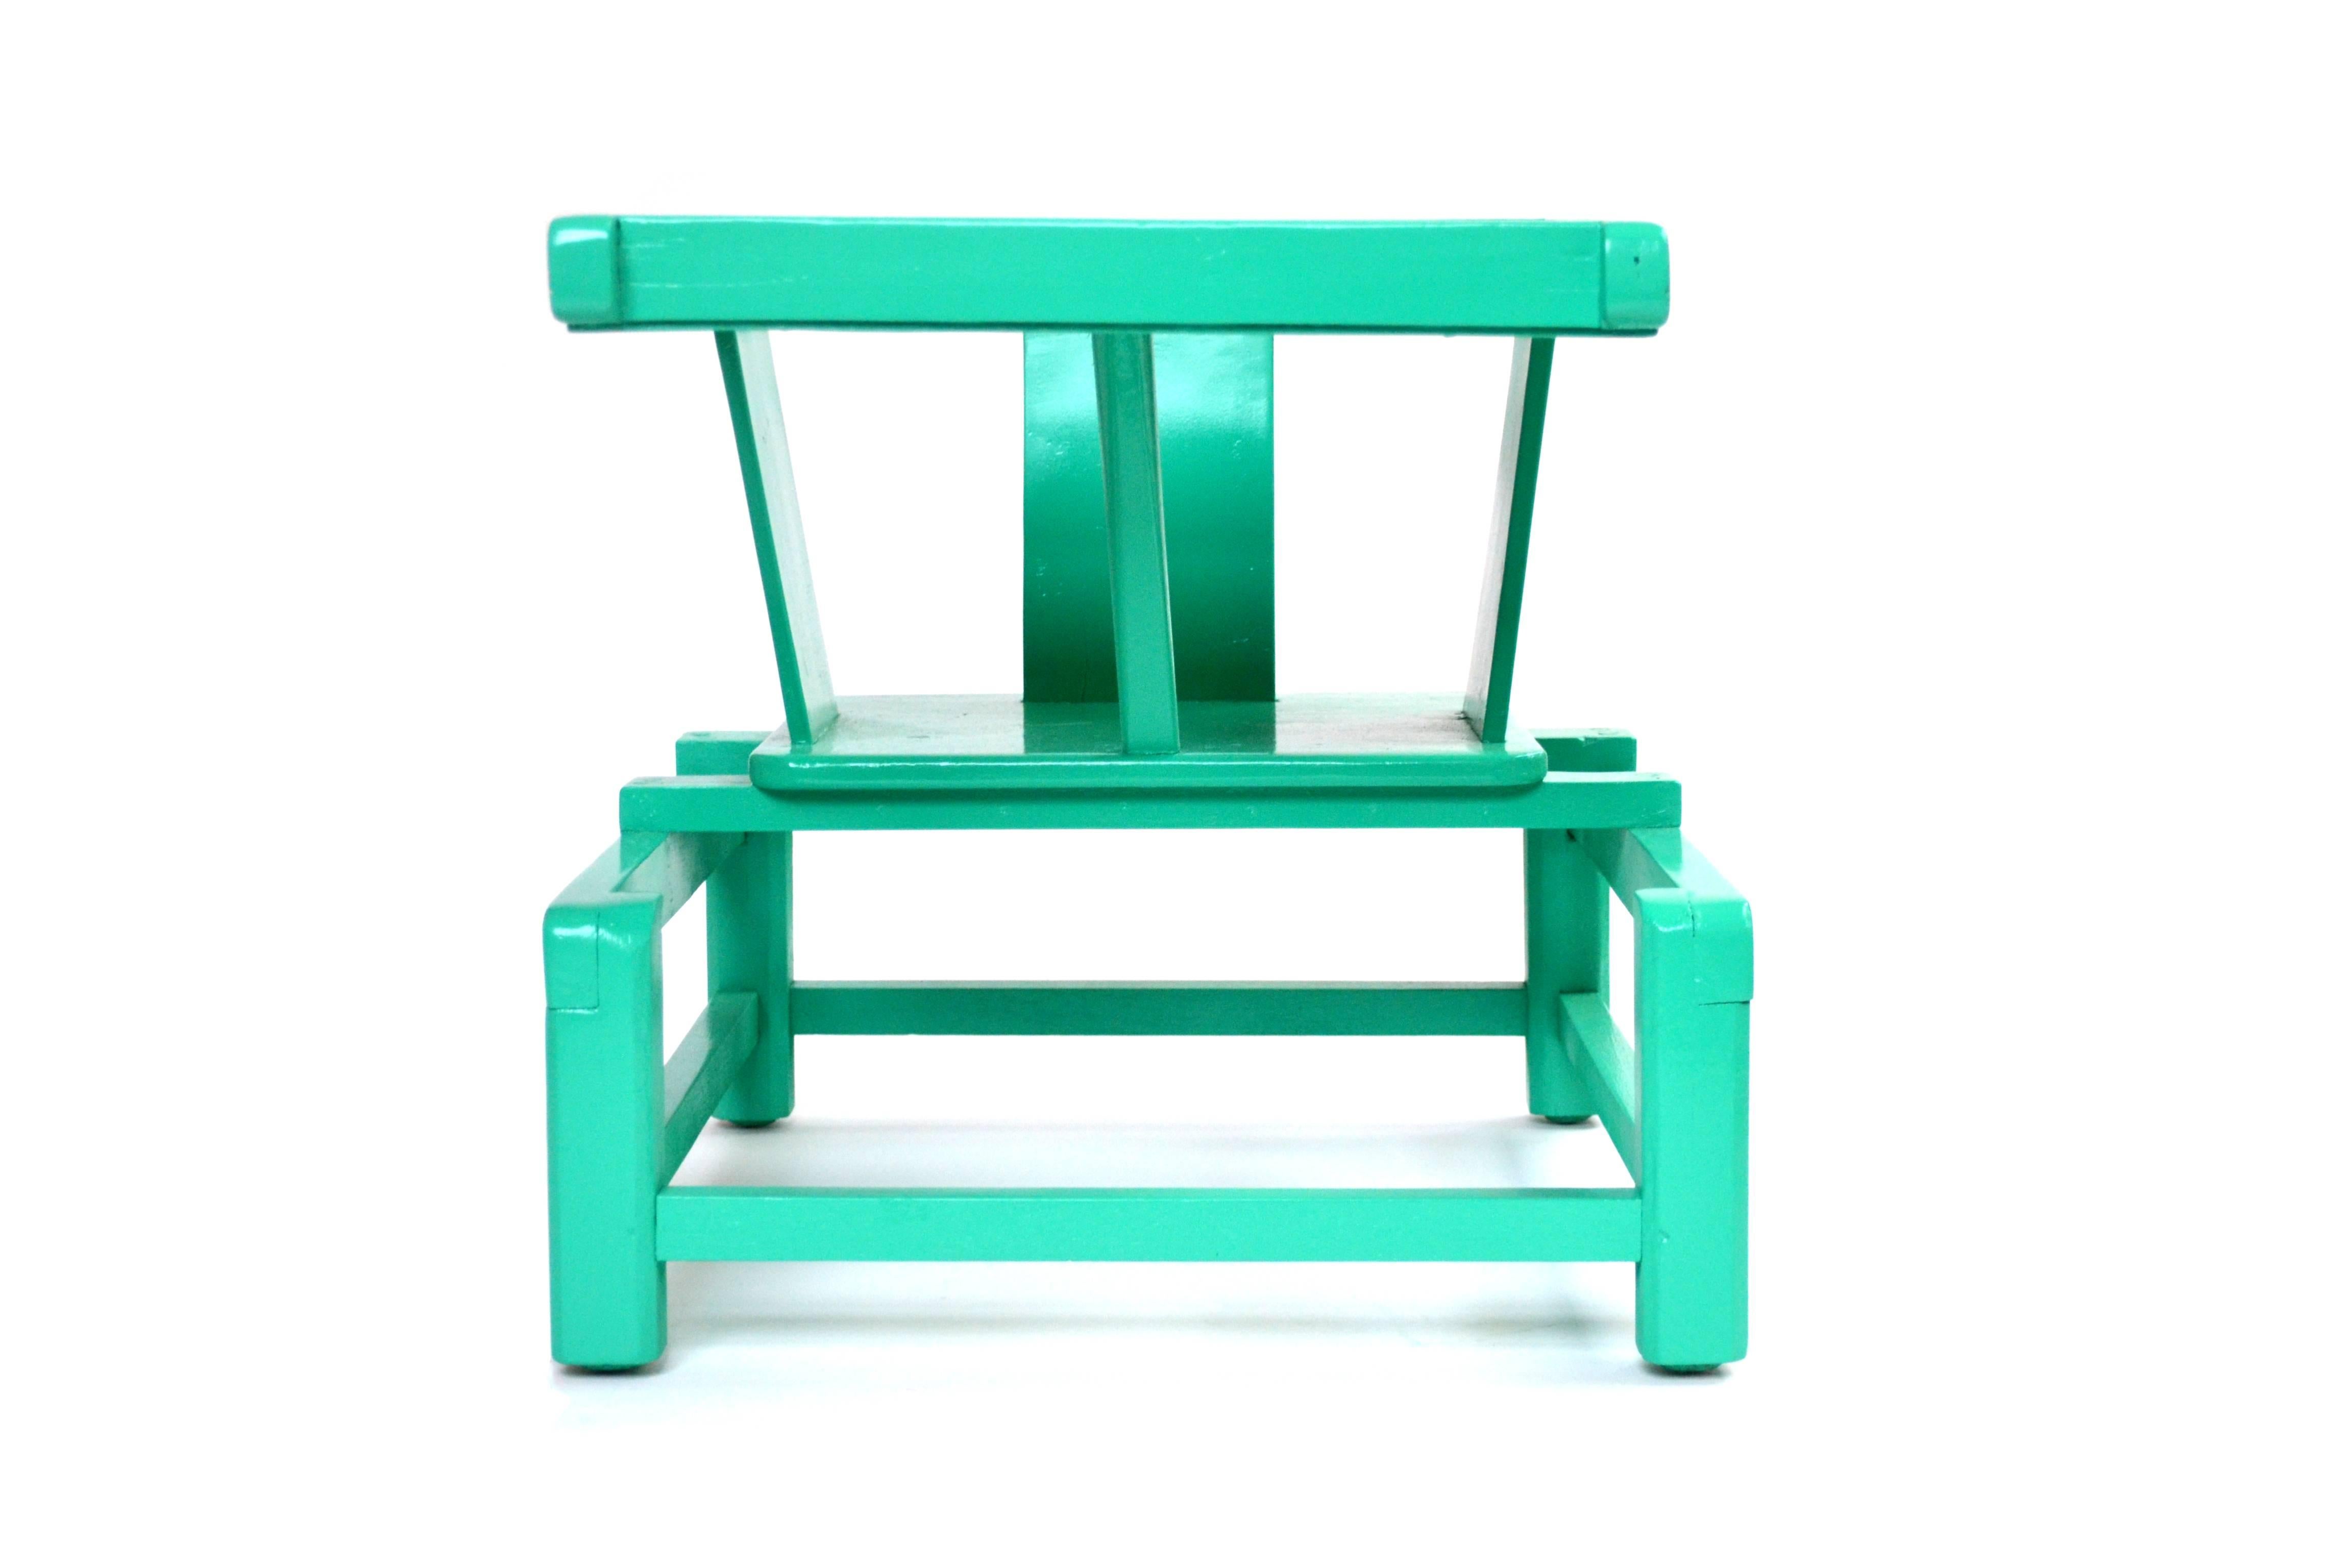 Mid-Century Modern Tot Play Chair in Teal Lacquered Wood 

USA
Wood, lacquer
H 17.75 in, W 15 in, D 21 in (seat: H 8.5 in)